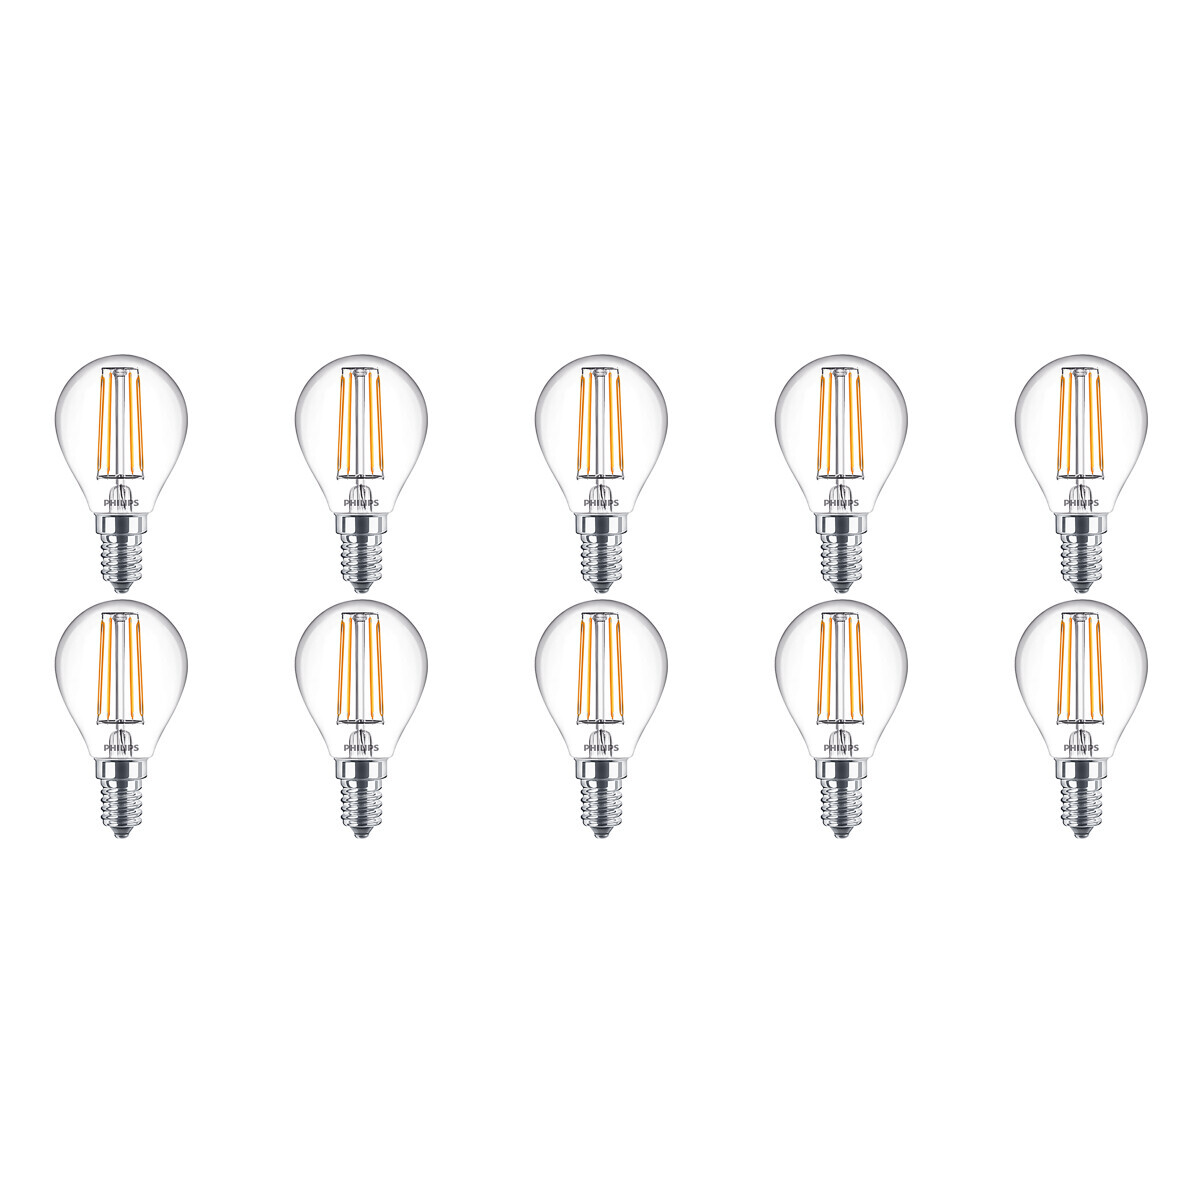 BES LED PHILIPS - LED Lamp 10 Pack - CorePro Luster 827 P45 CL - E14 Fitting - 4.5W - Warm Wit 2700K Vervangt 40W